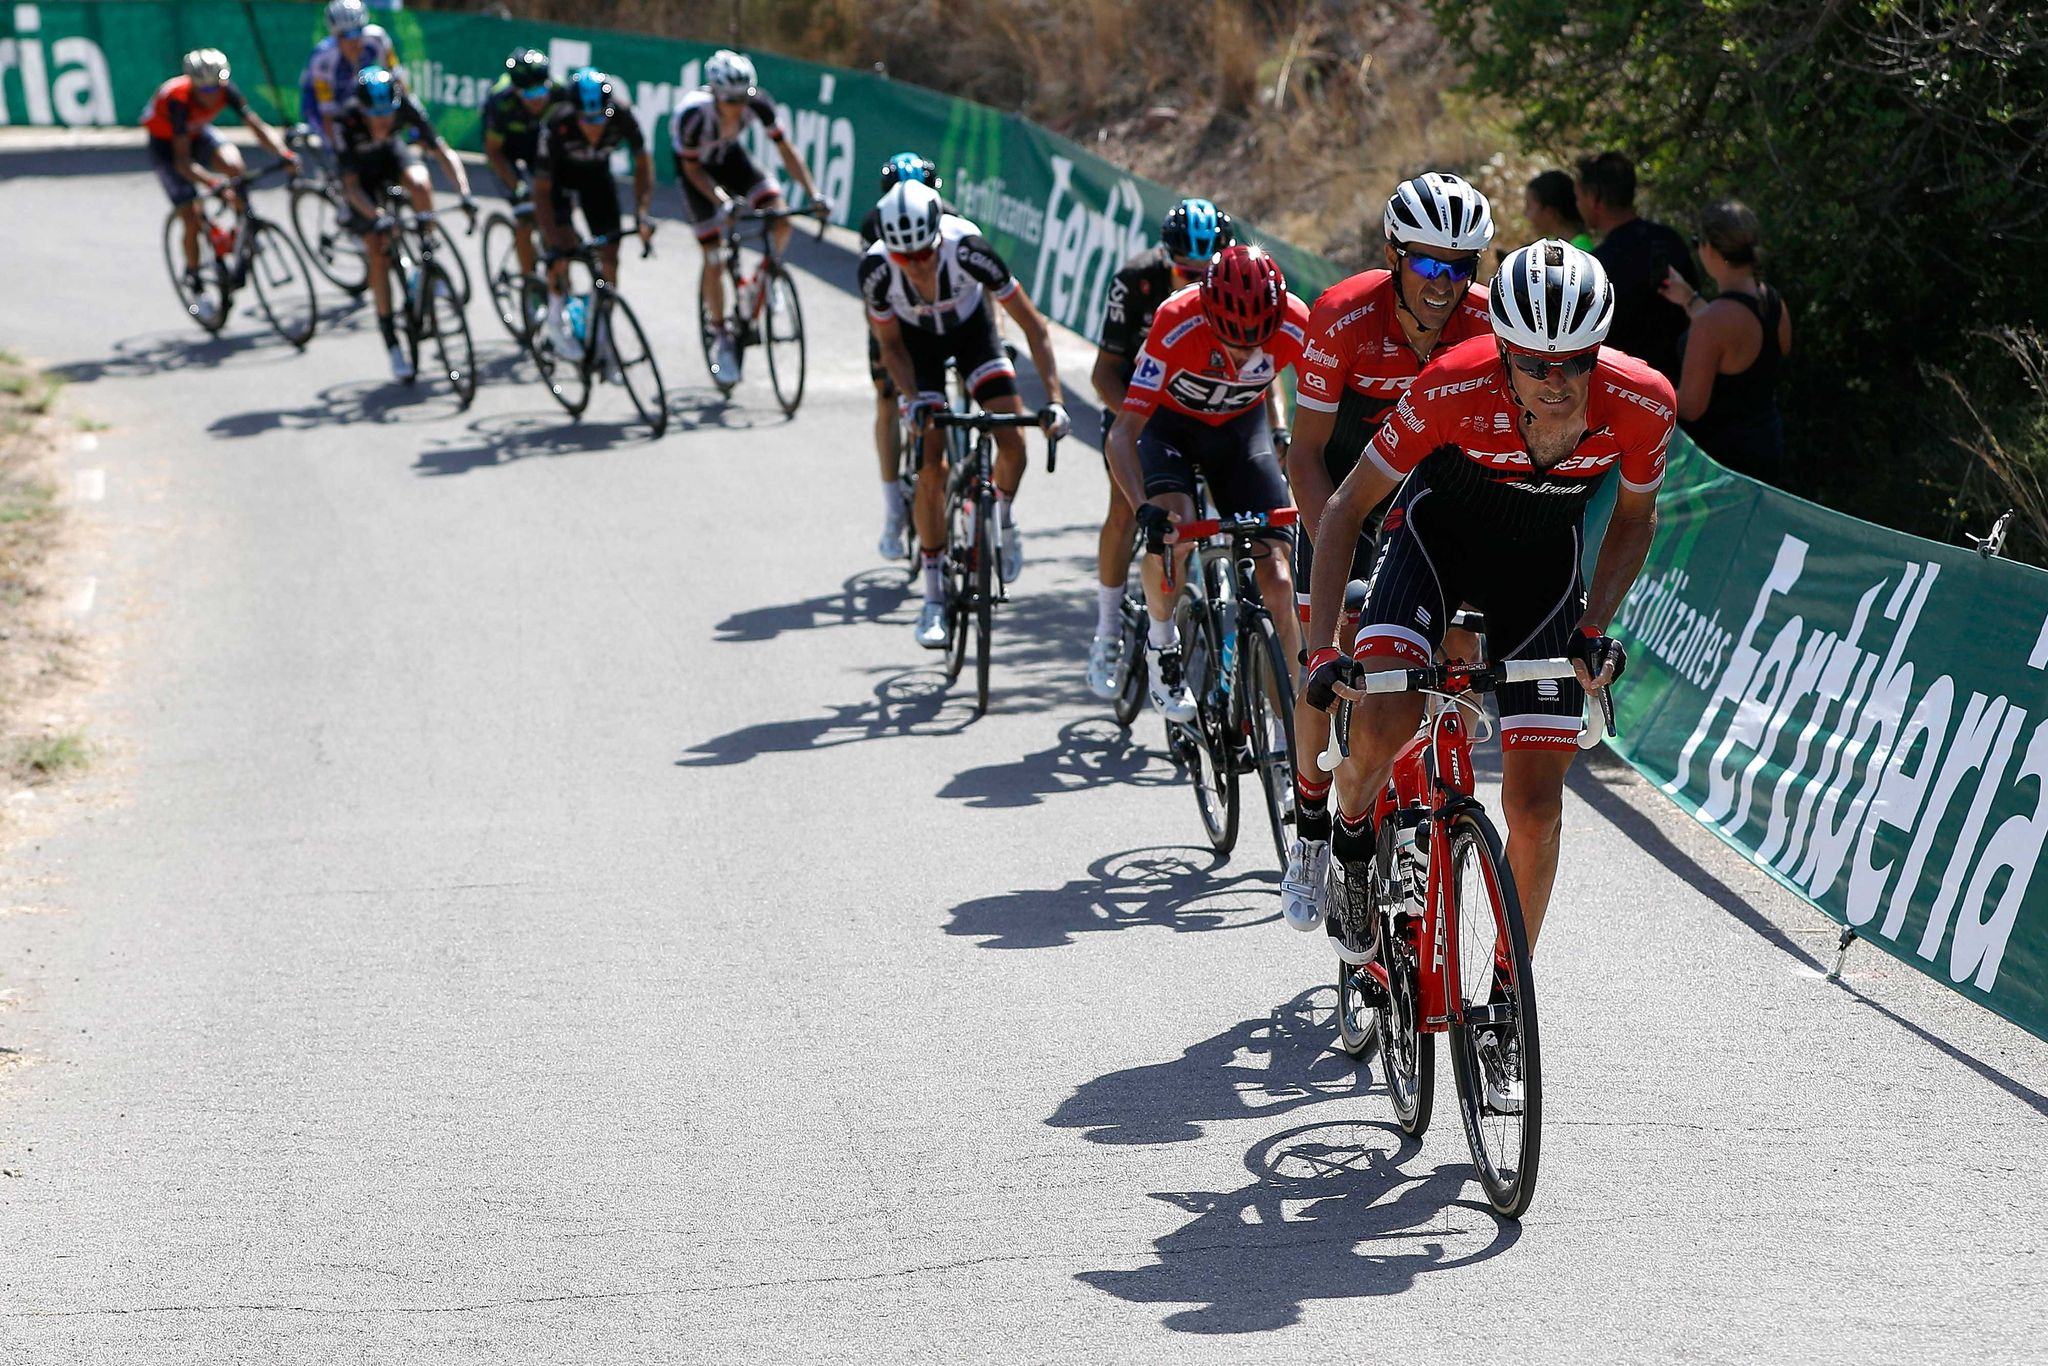 stetina sets the pace for teammate alberto contador during stage 6 of the 2017 vuelta a españa